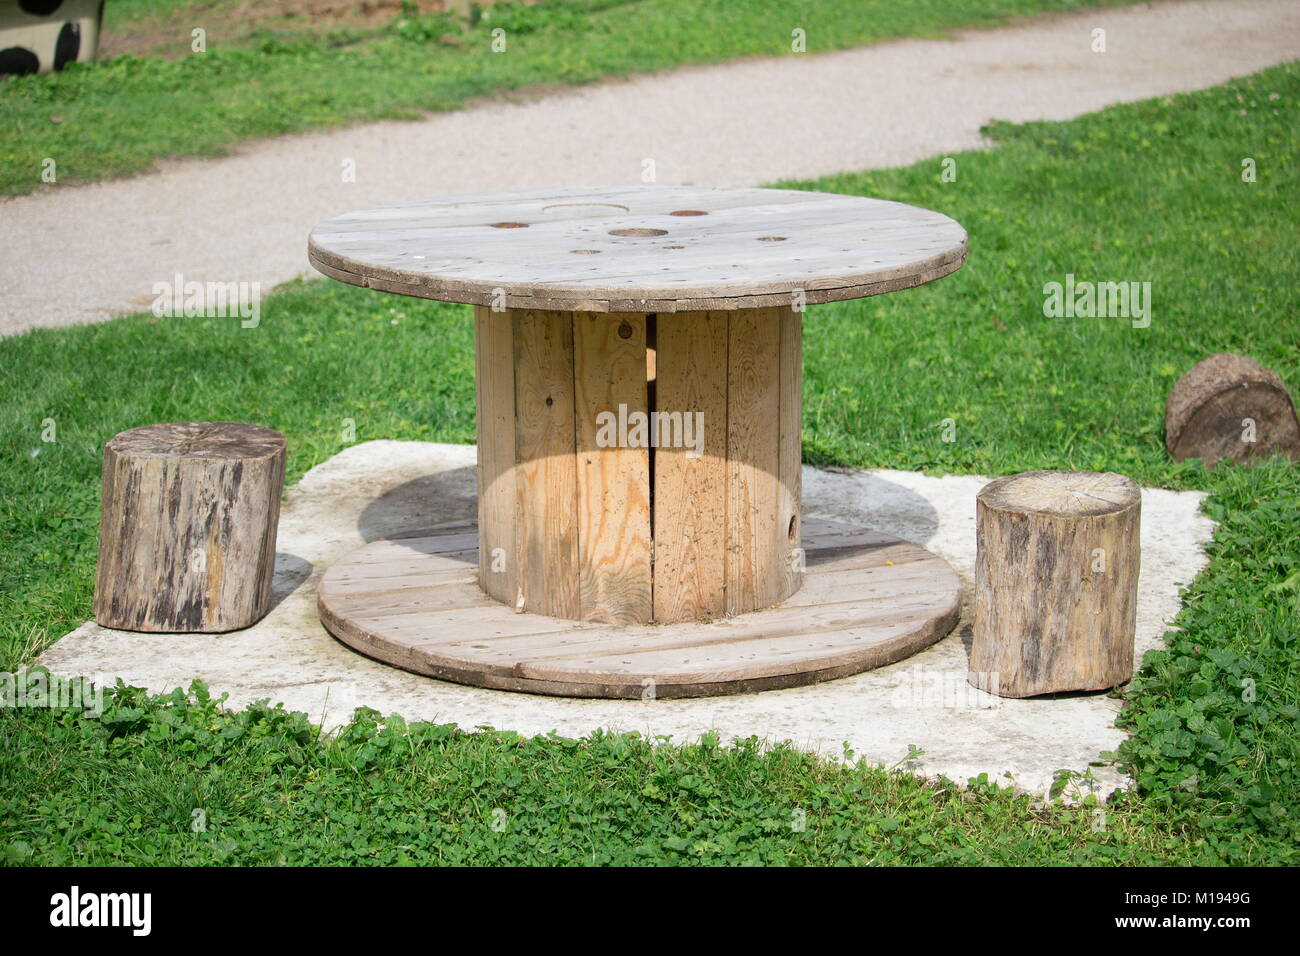 a Picnic table and wooden logs to serve as a chair Stock Photo